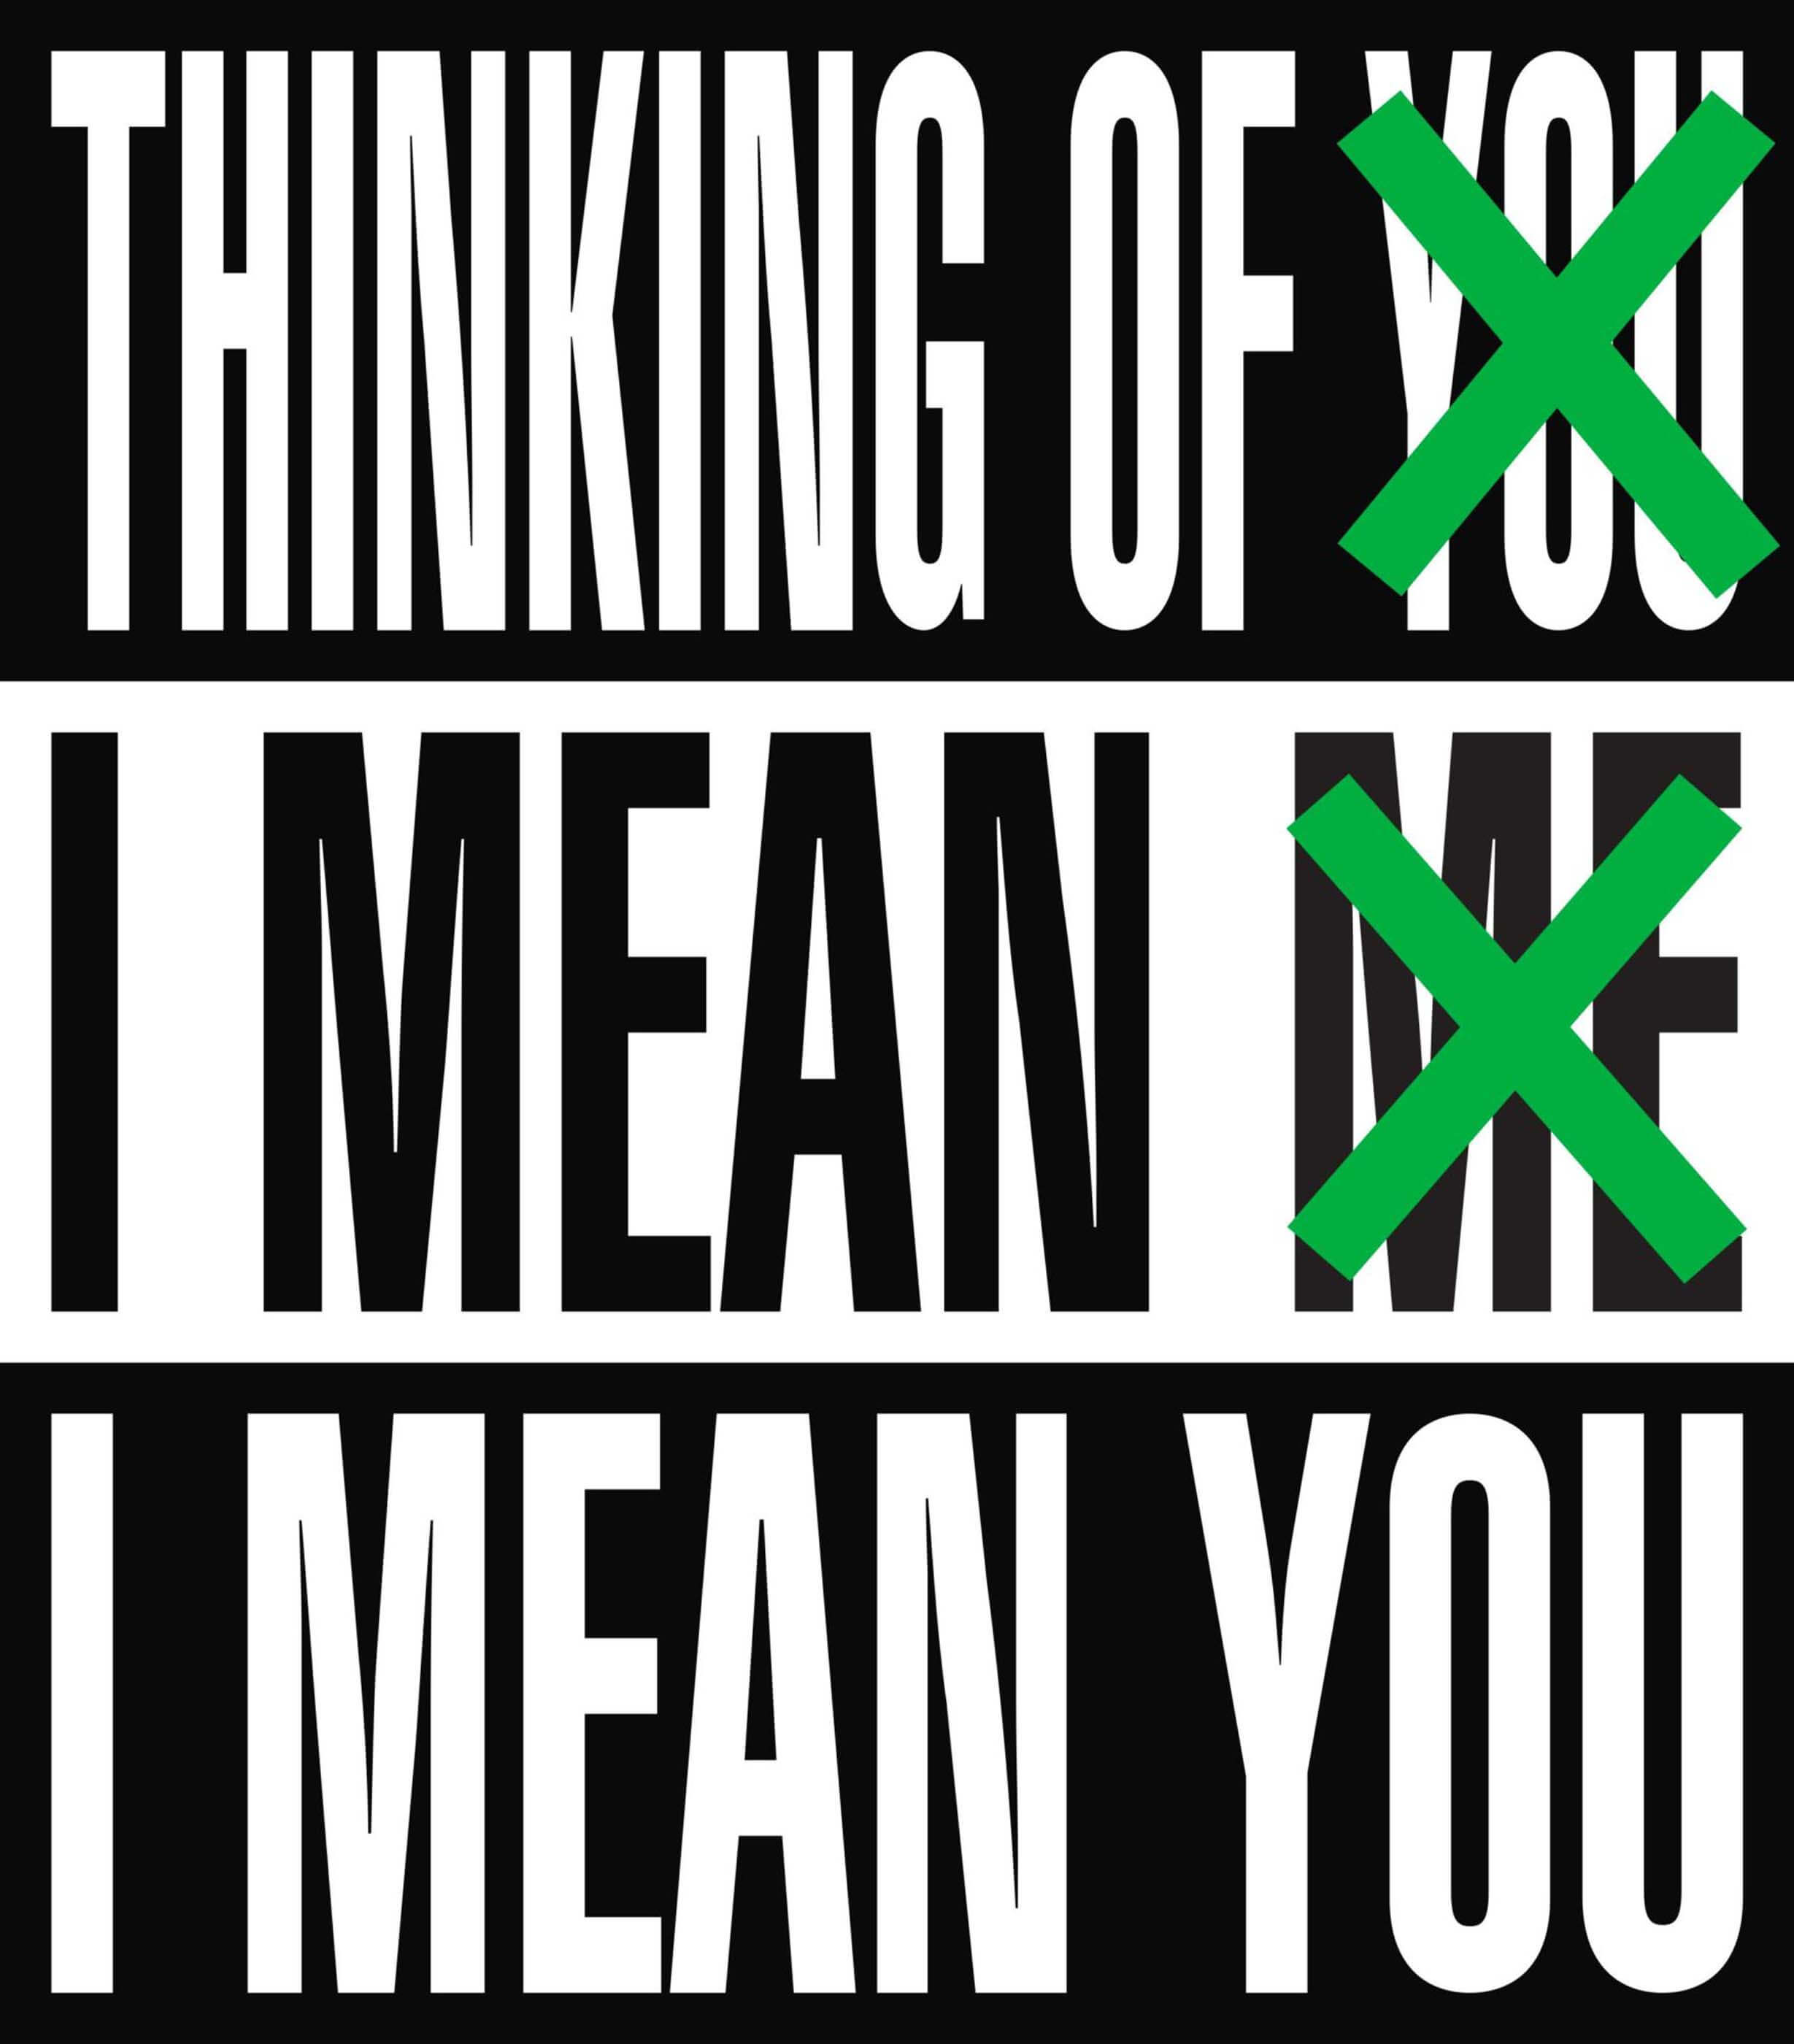 black and white poster with green x's